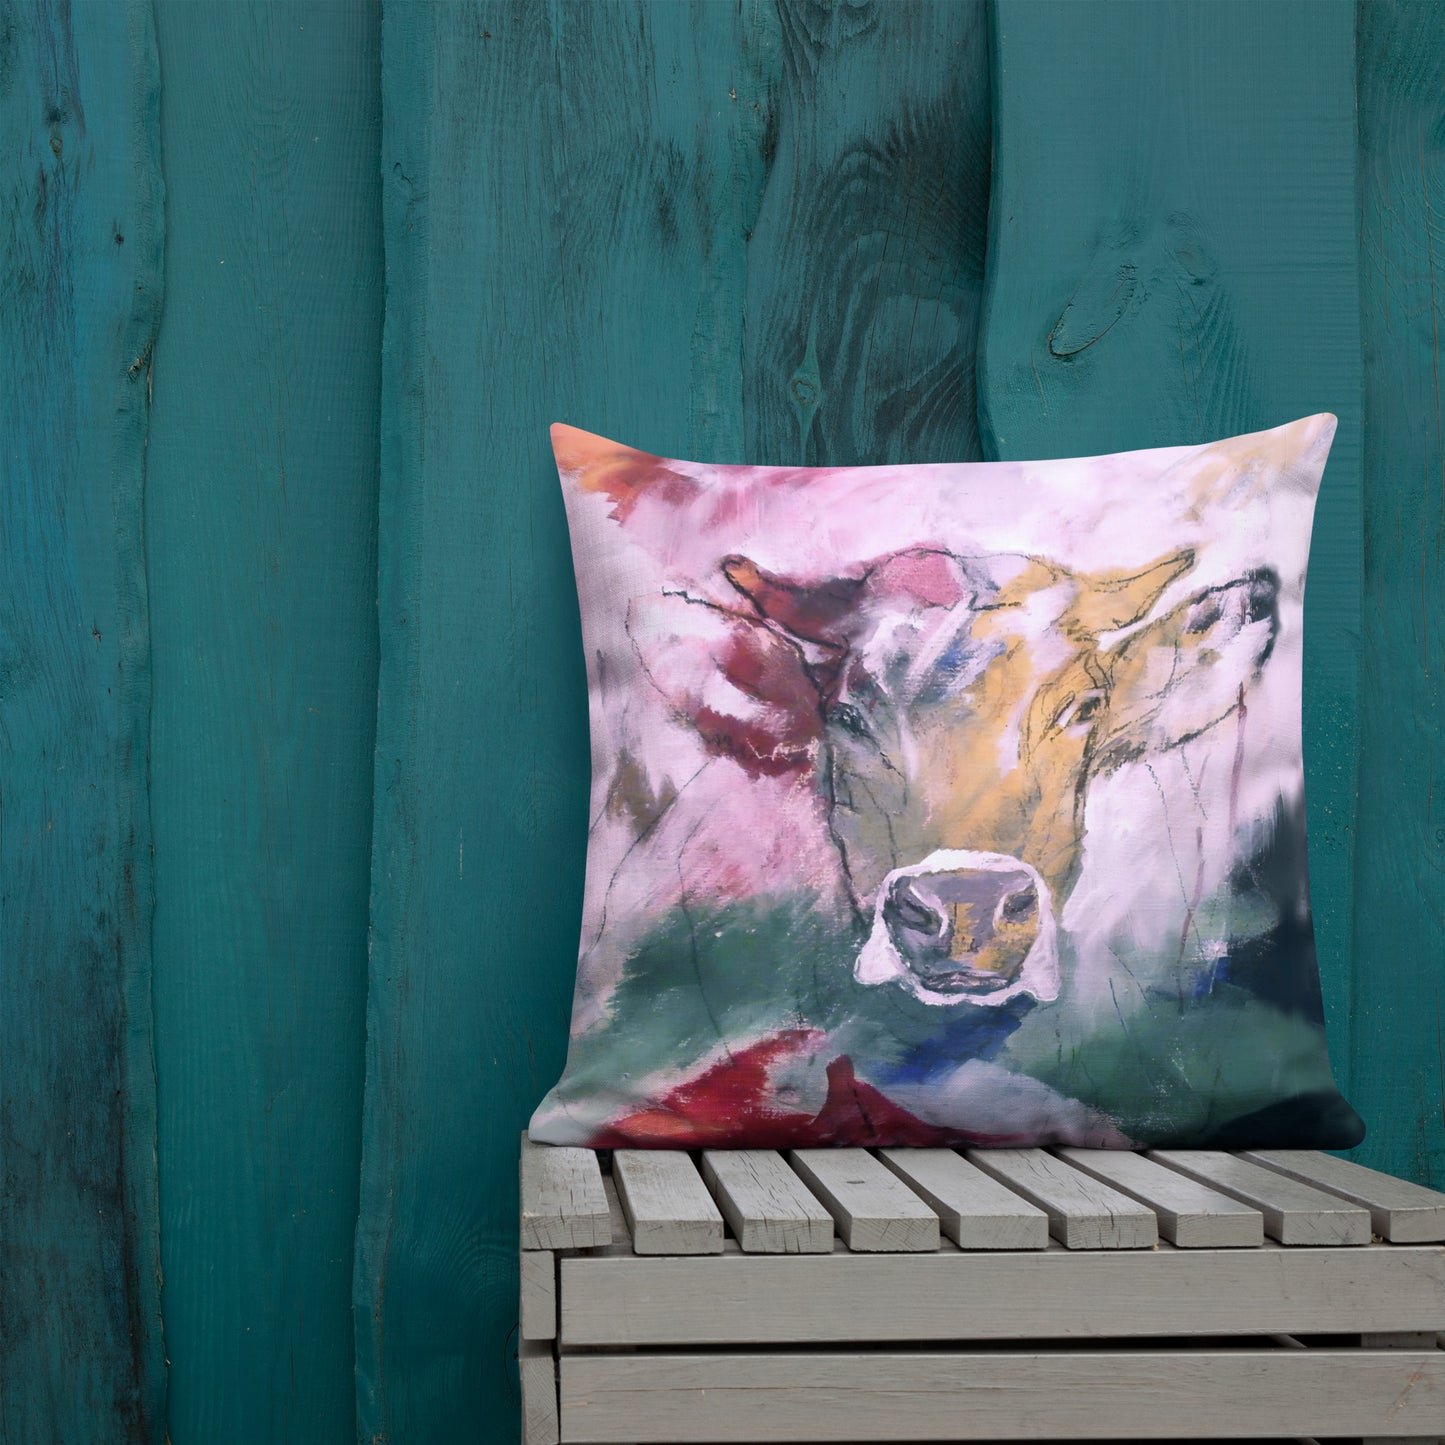 Animal cushions in a frenzy of colour: "Berta" the cow and "Otto" the marmot